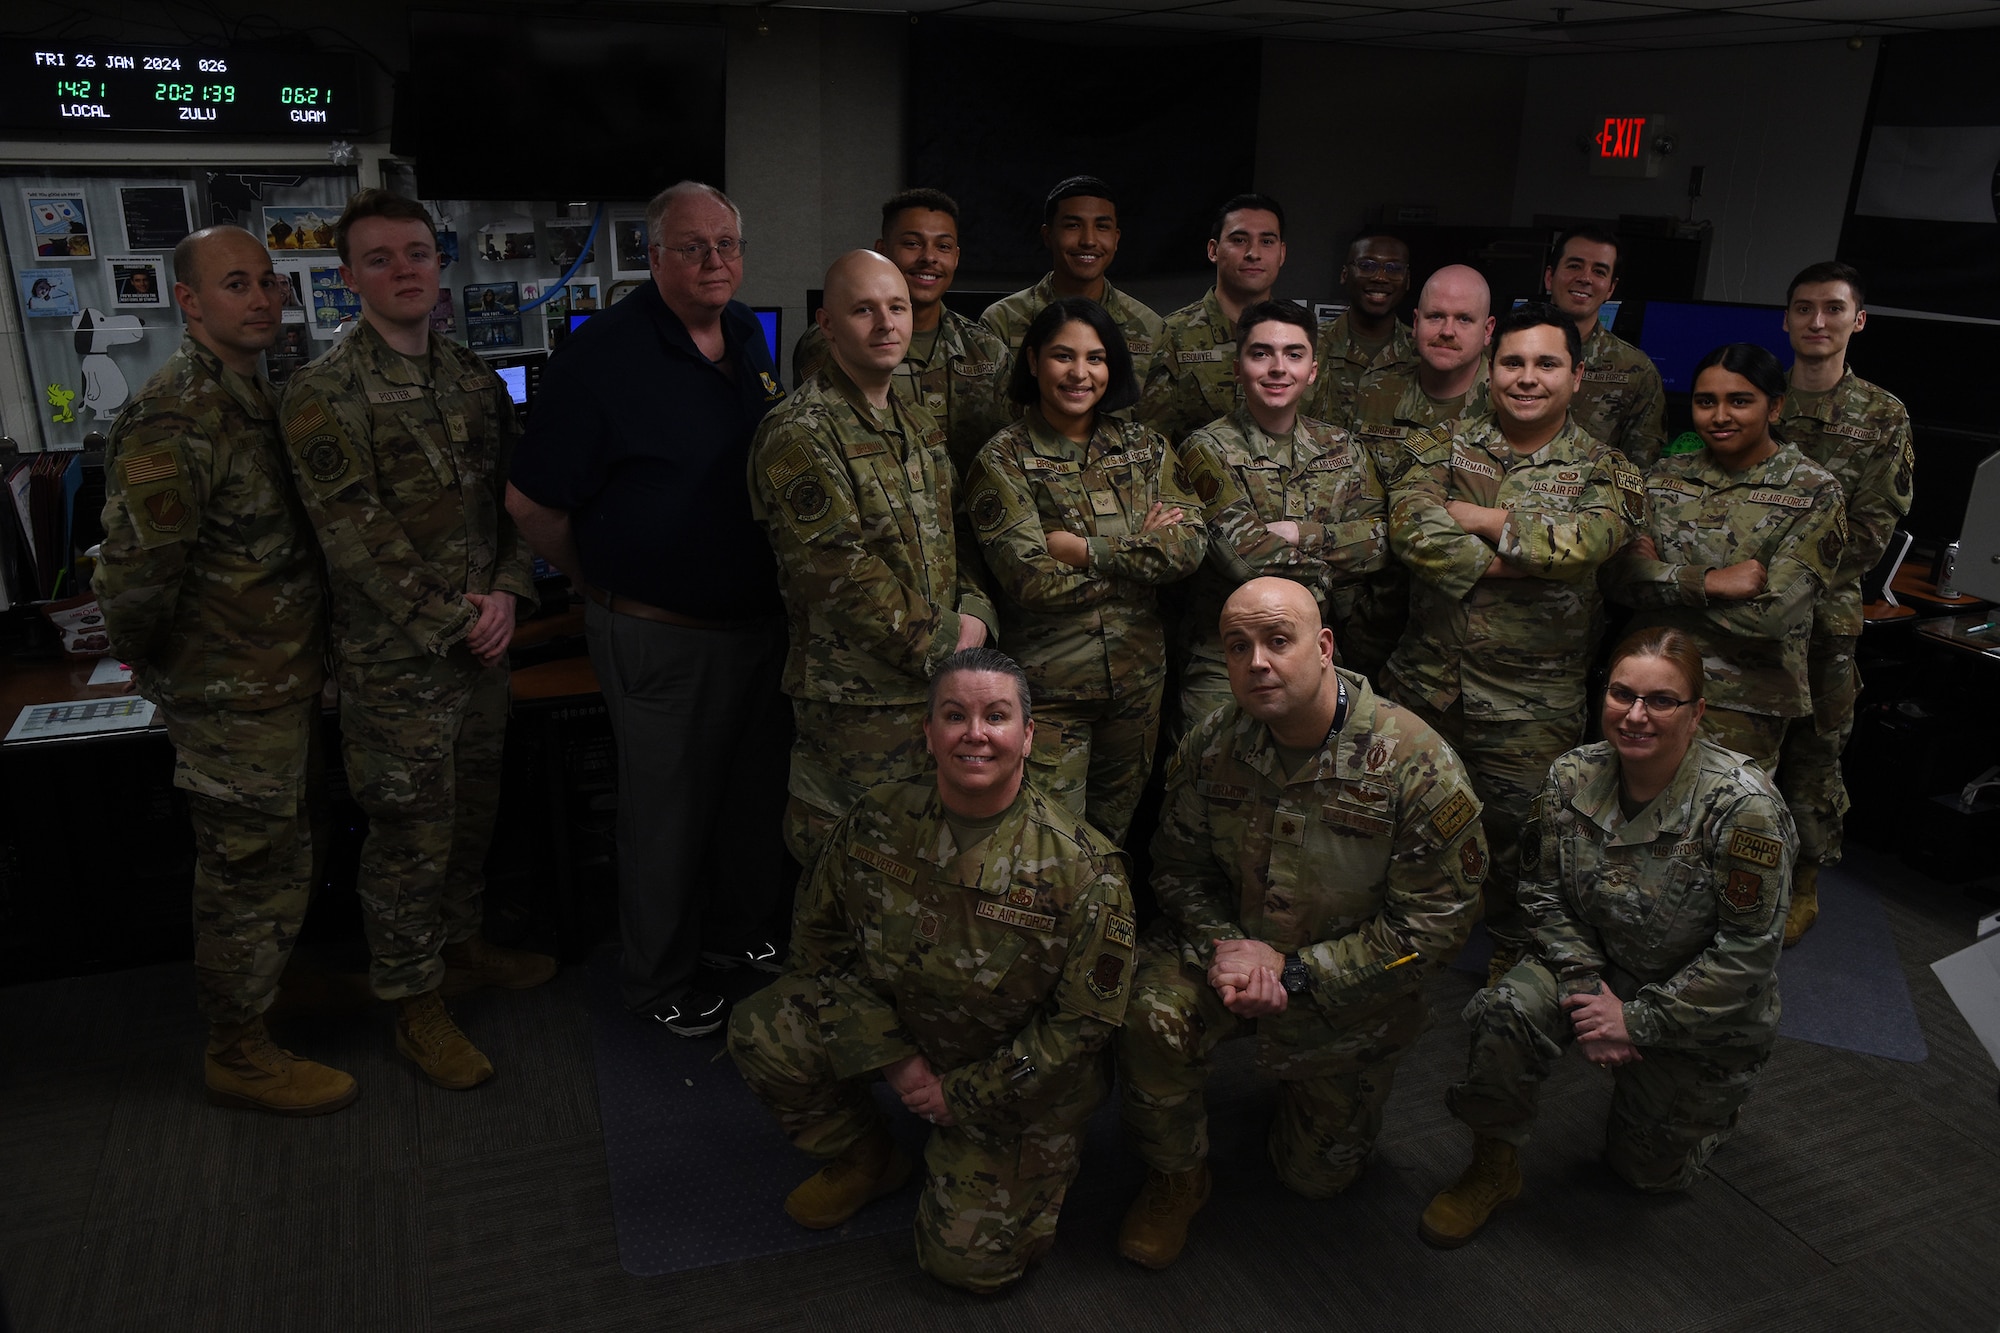 The 131st Bomb Wing Command Post team, along with several of its members, earned accolades during the 2023 Air National Guard Command and Control (C2) Operations Annual Awards.